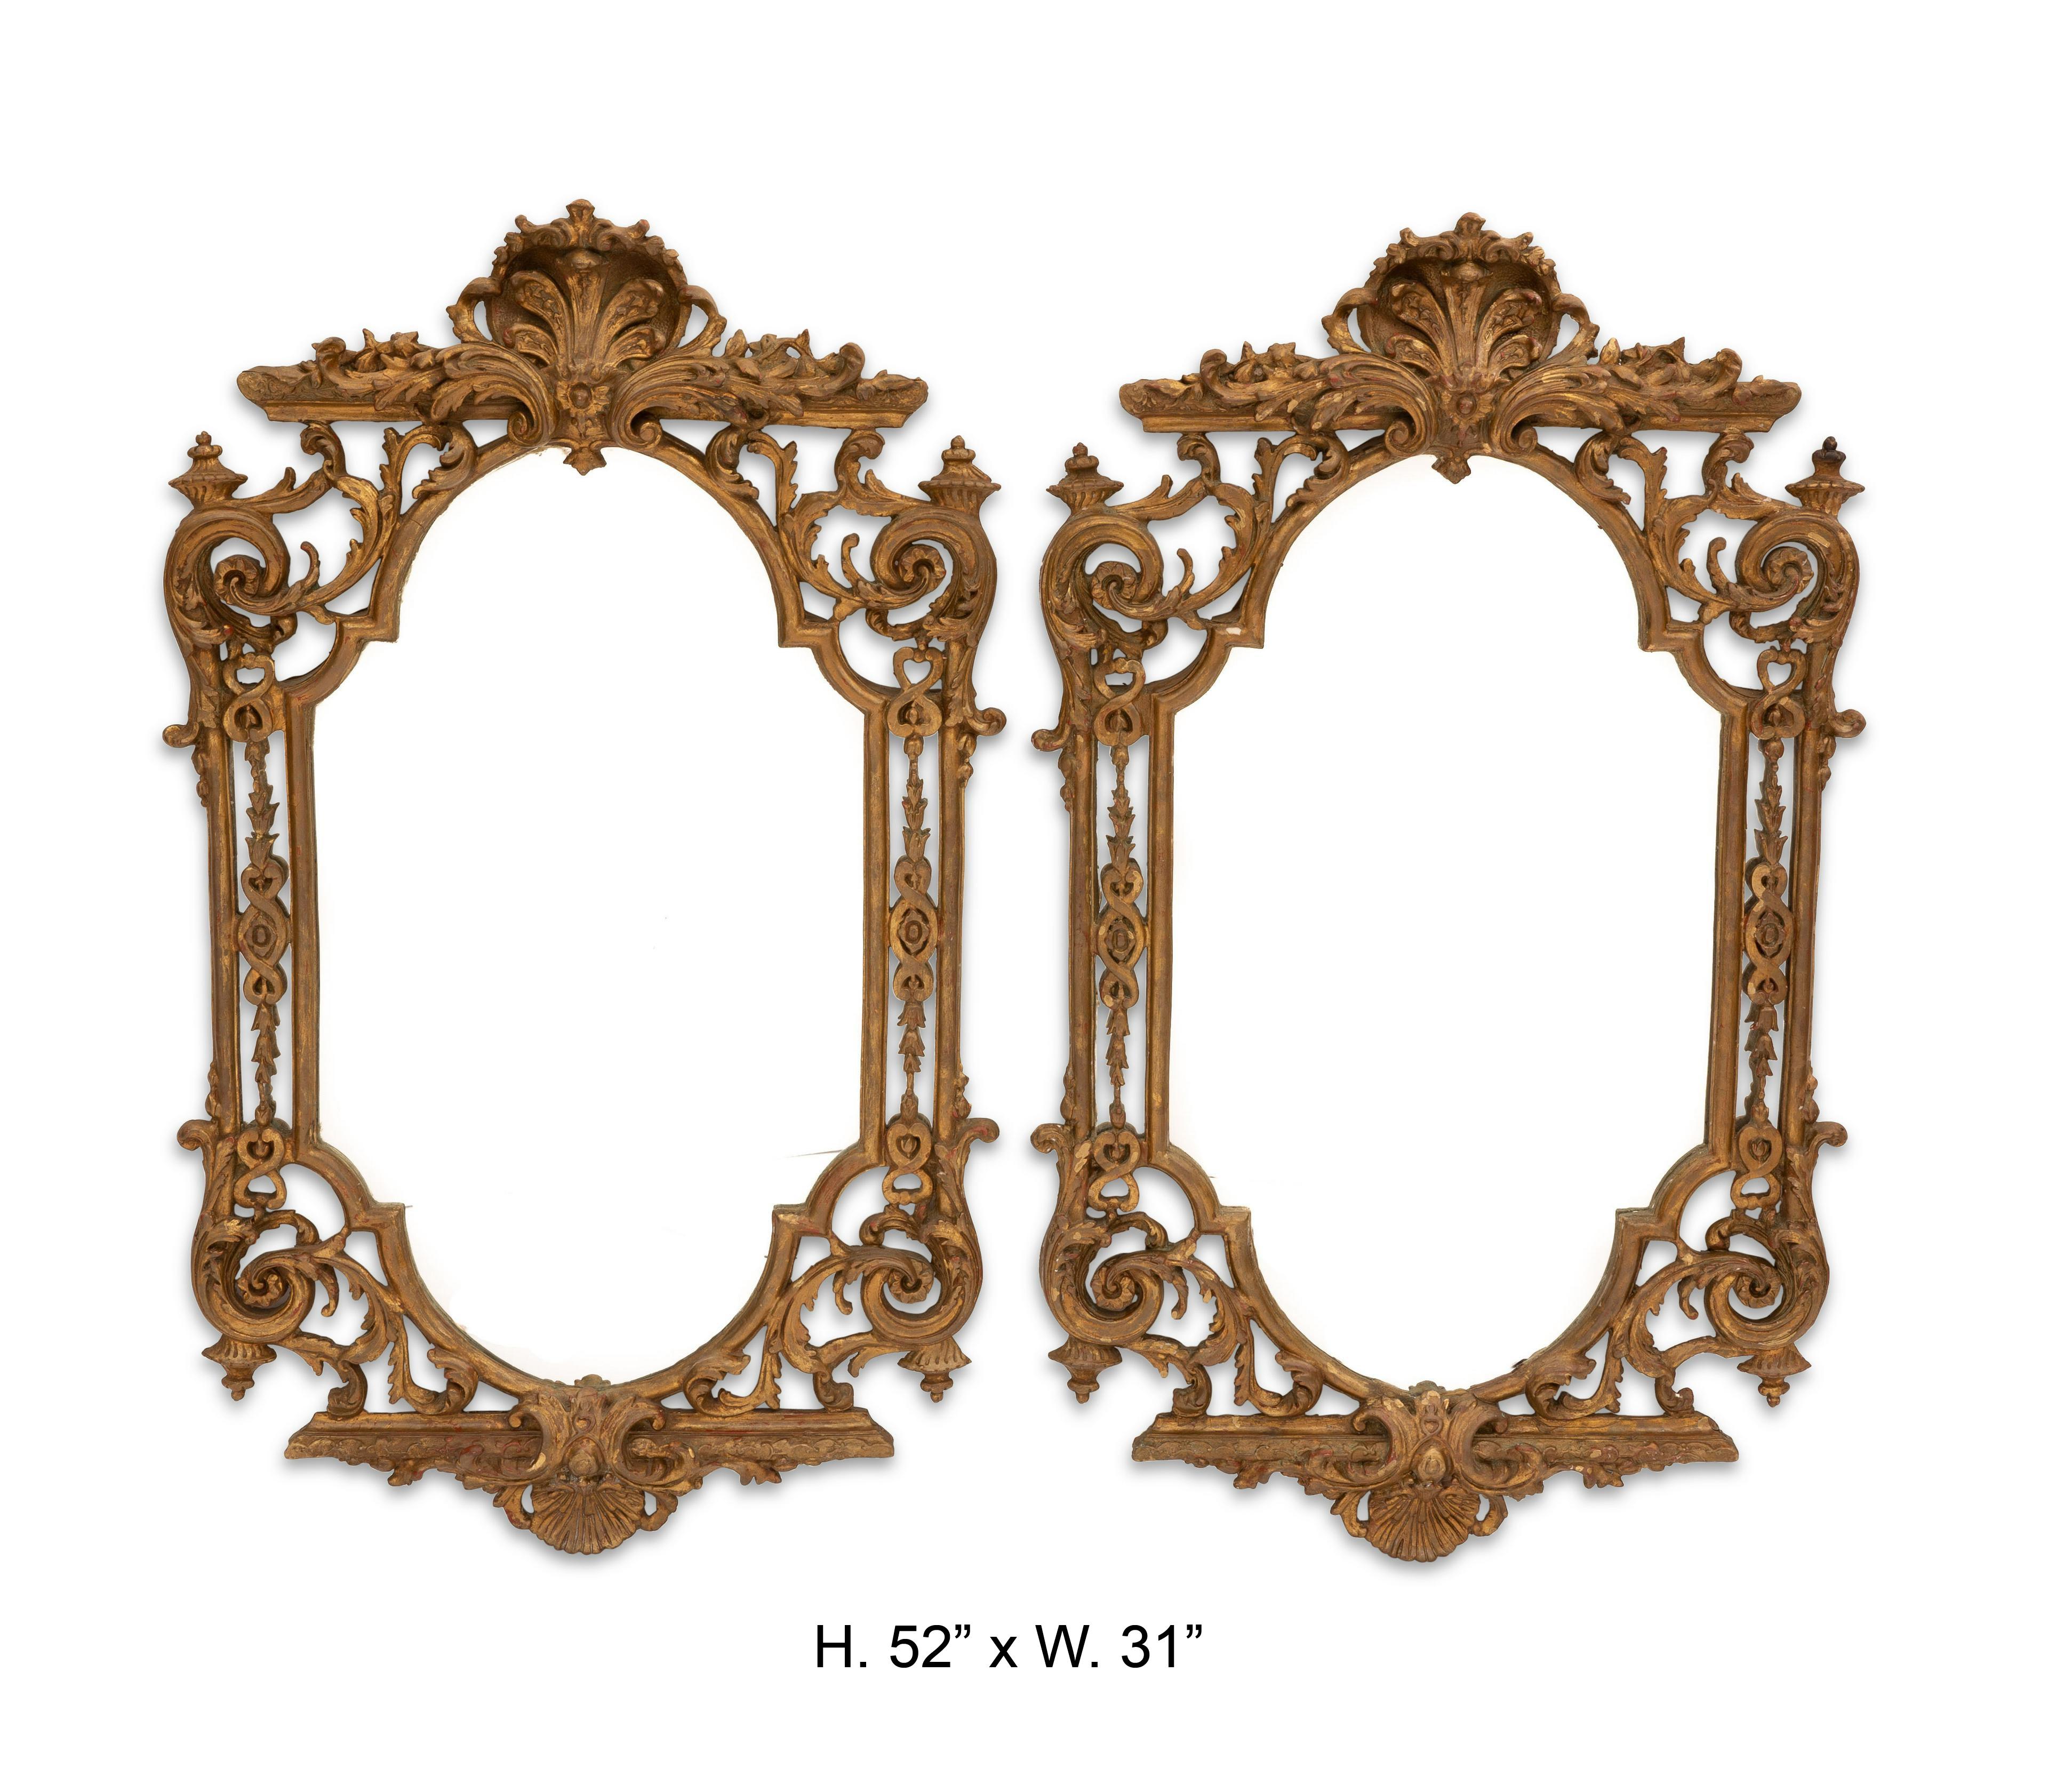 Impressive pair of Italian Baroque style carved giltwood and gesso mirrors. Intricately carved shell cresting encircled with foliage top over a pierced scrolling giltwood frame with a shaped mirror plate, circa 1900.

The fact that these mirrors